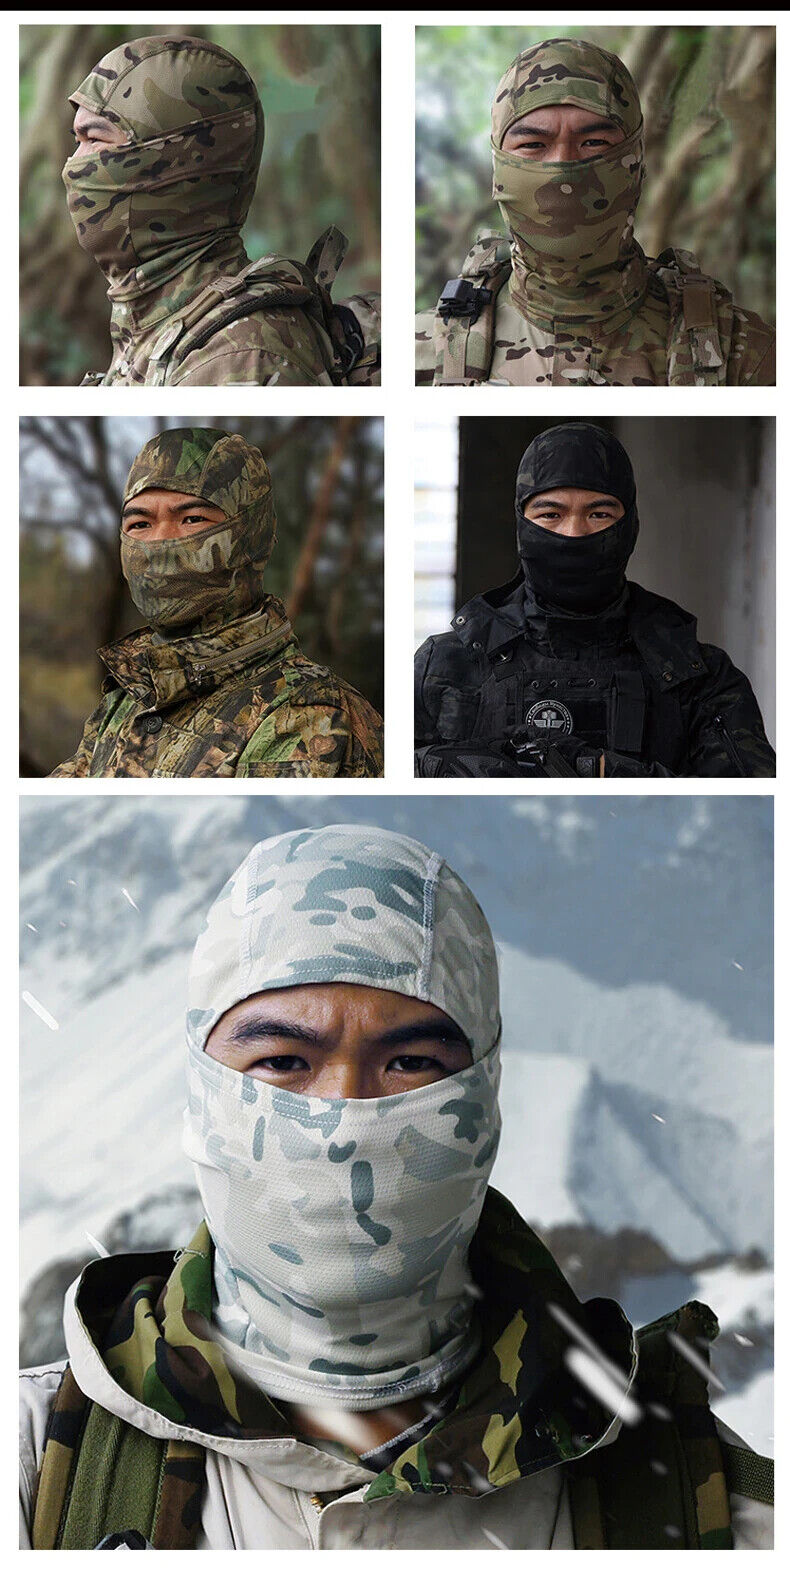 Military/Hunting Balaclava. Full Face Mask, UV Protection. 2 colors to choose...